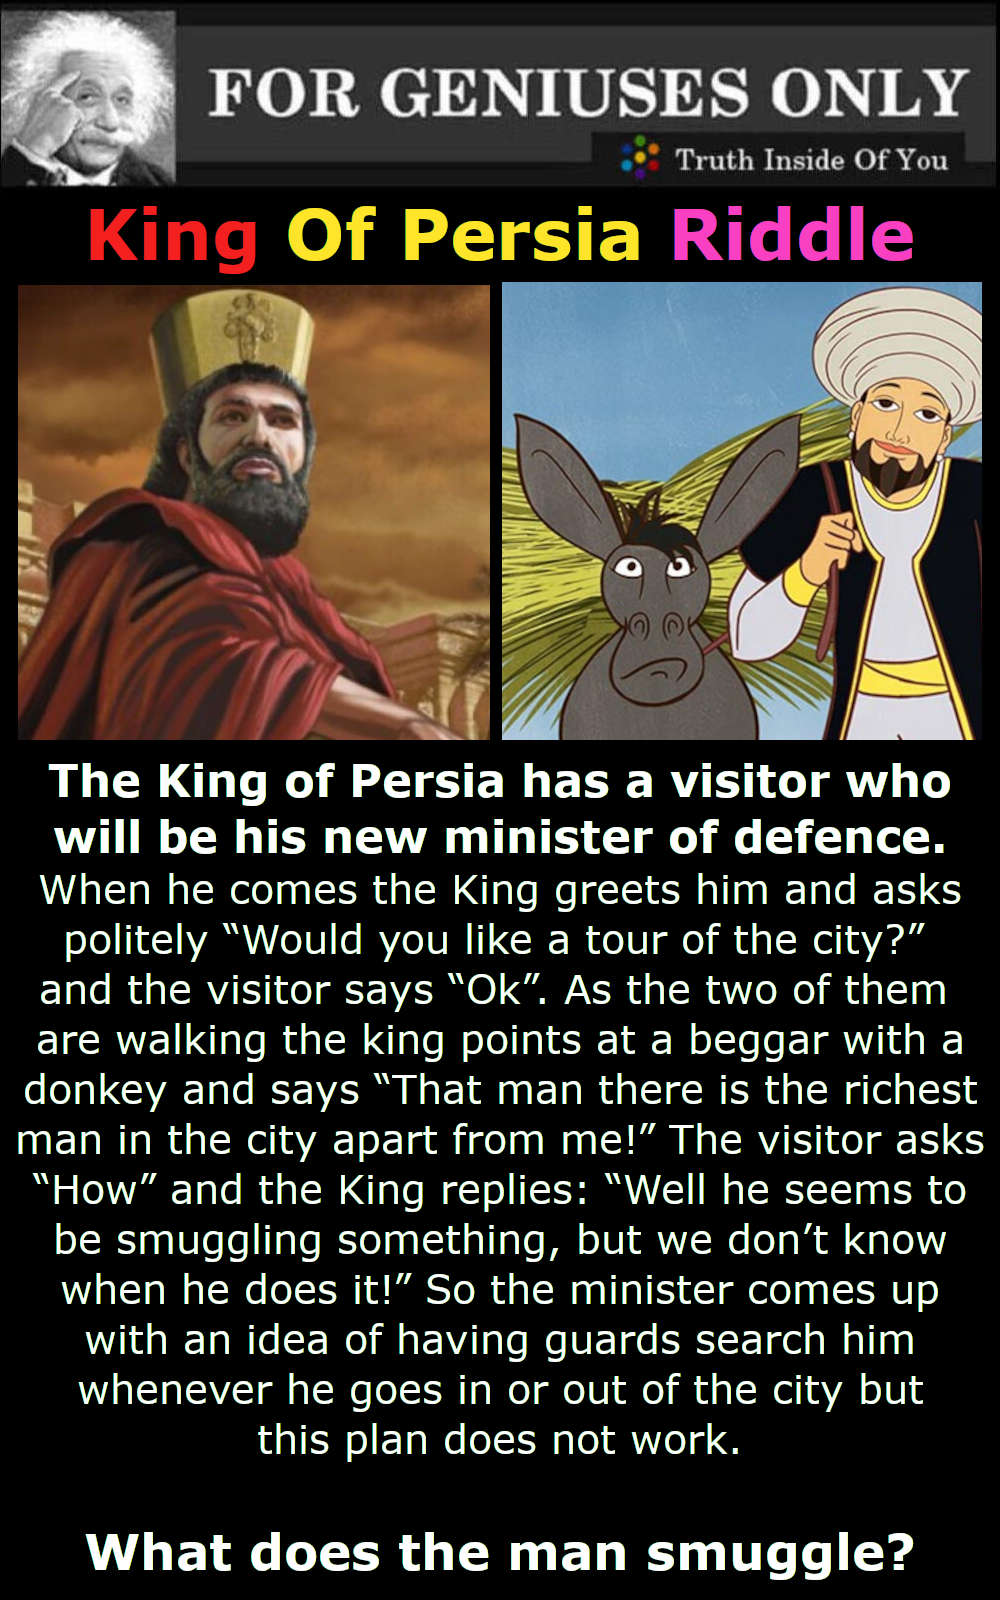 King of Persia Riddle